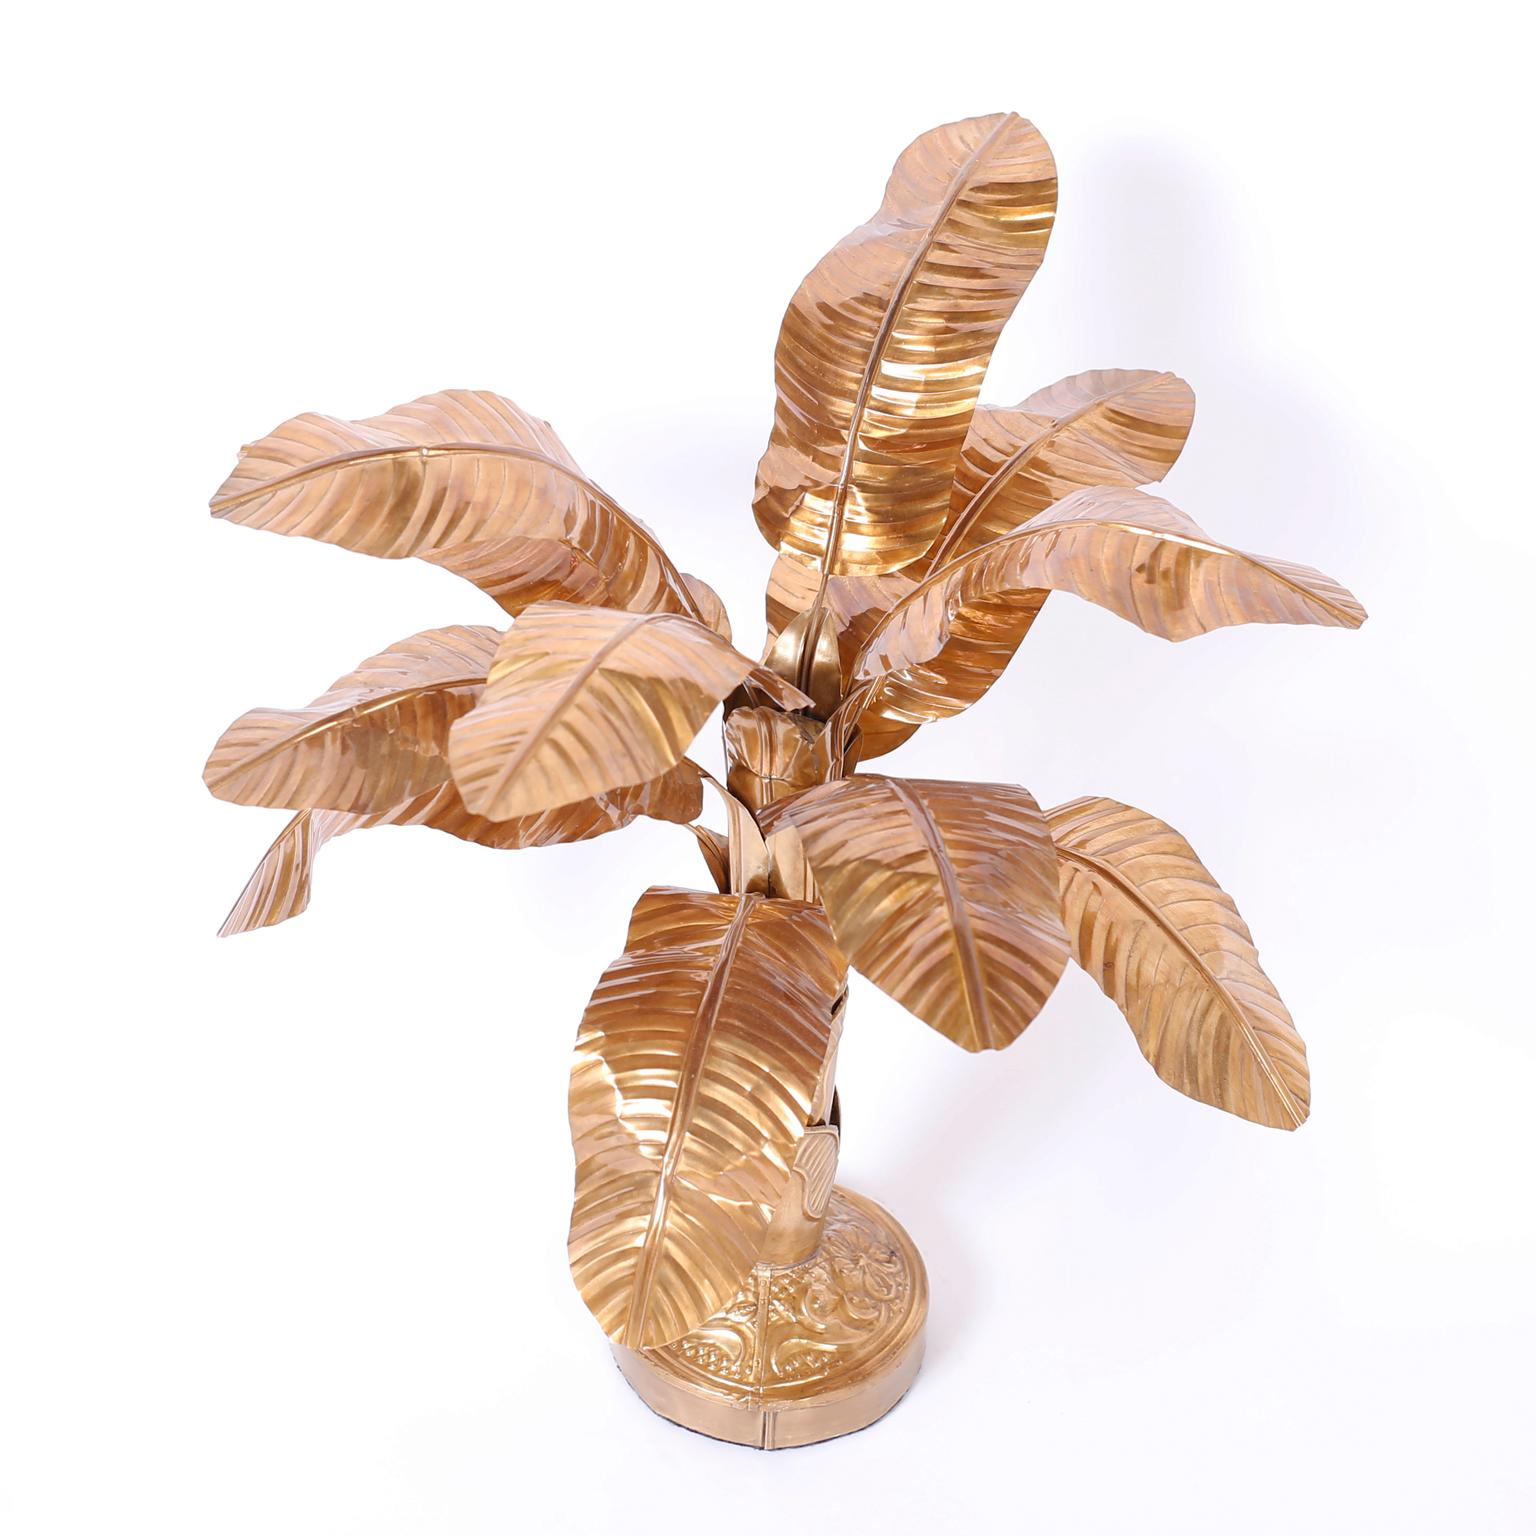 Chic stylized brass palm or banana tree sculpture with a graceful form and a custom finish, hand polished and lacquered for easy care.